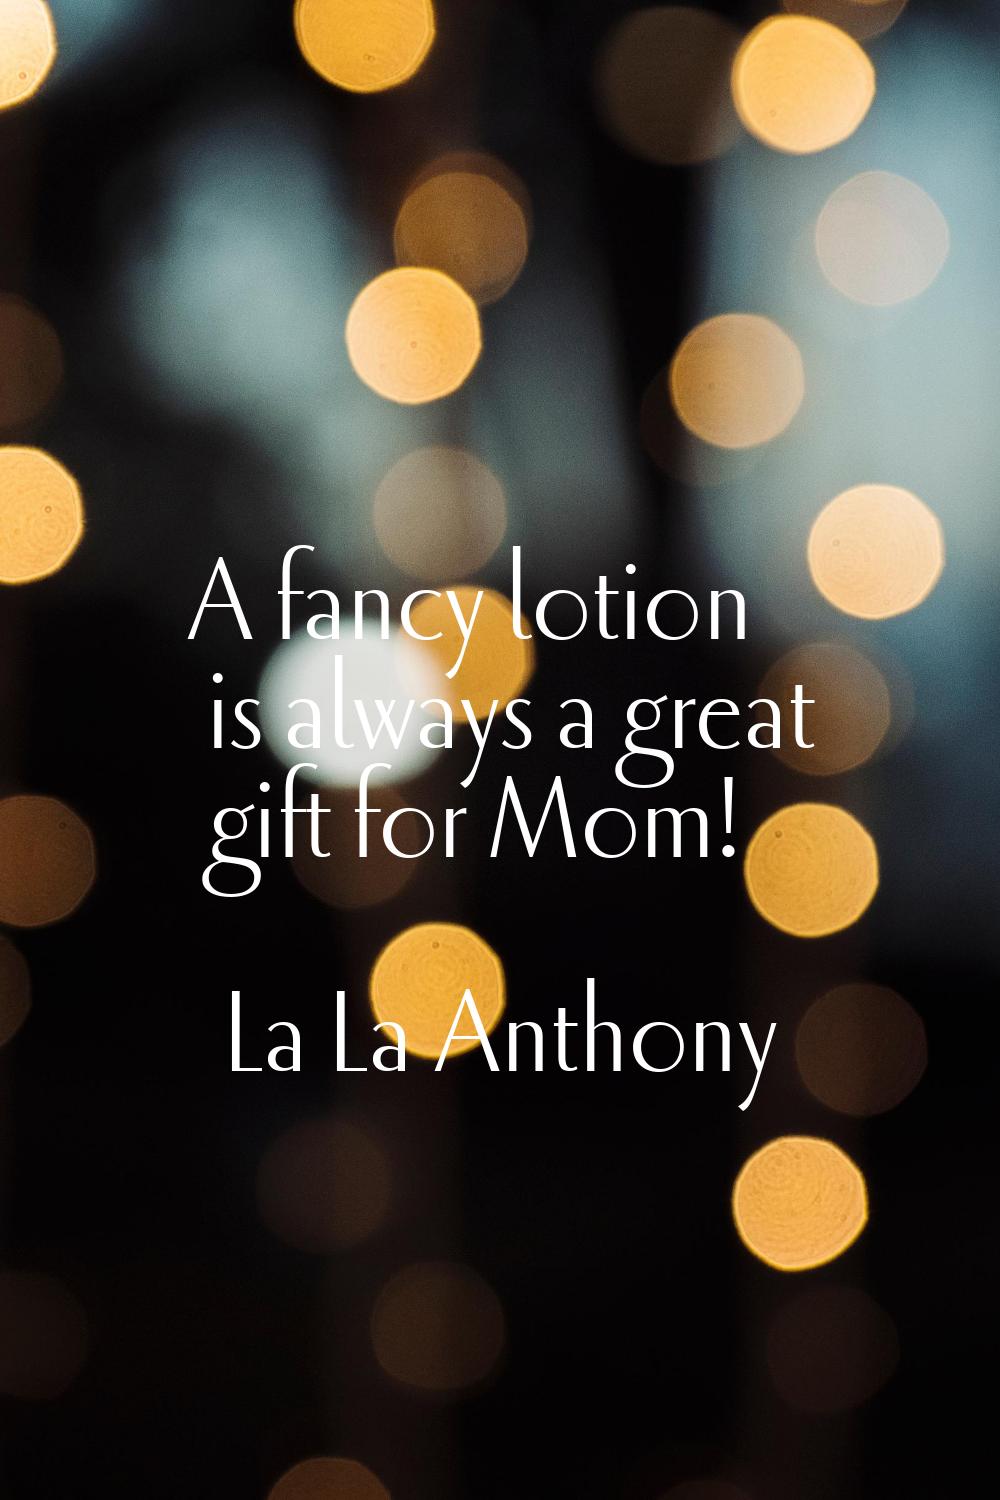 A fancy lotion is always a great gift for Mom!